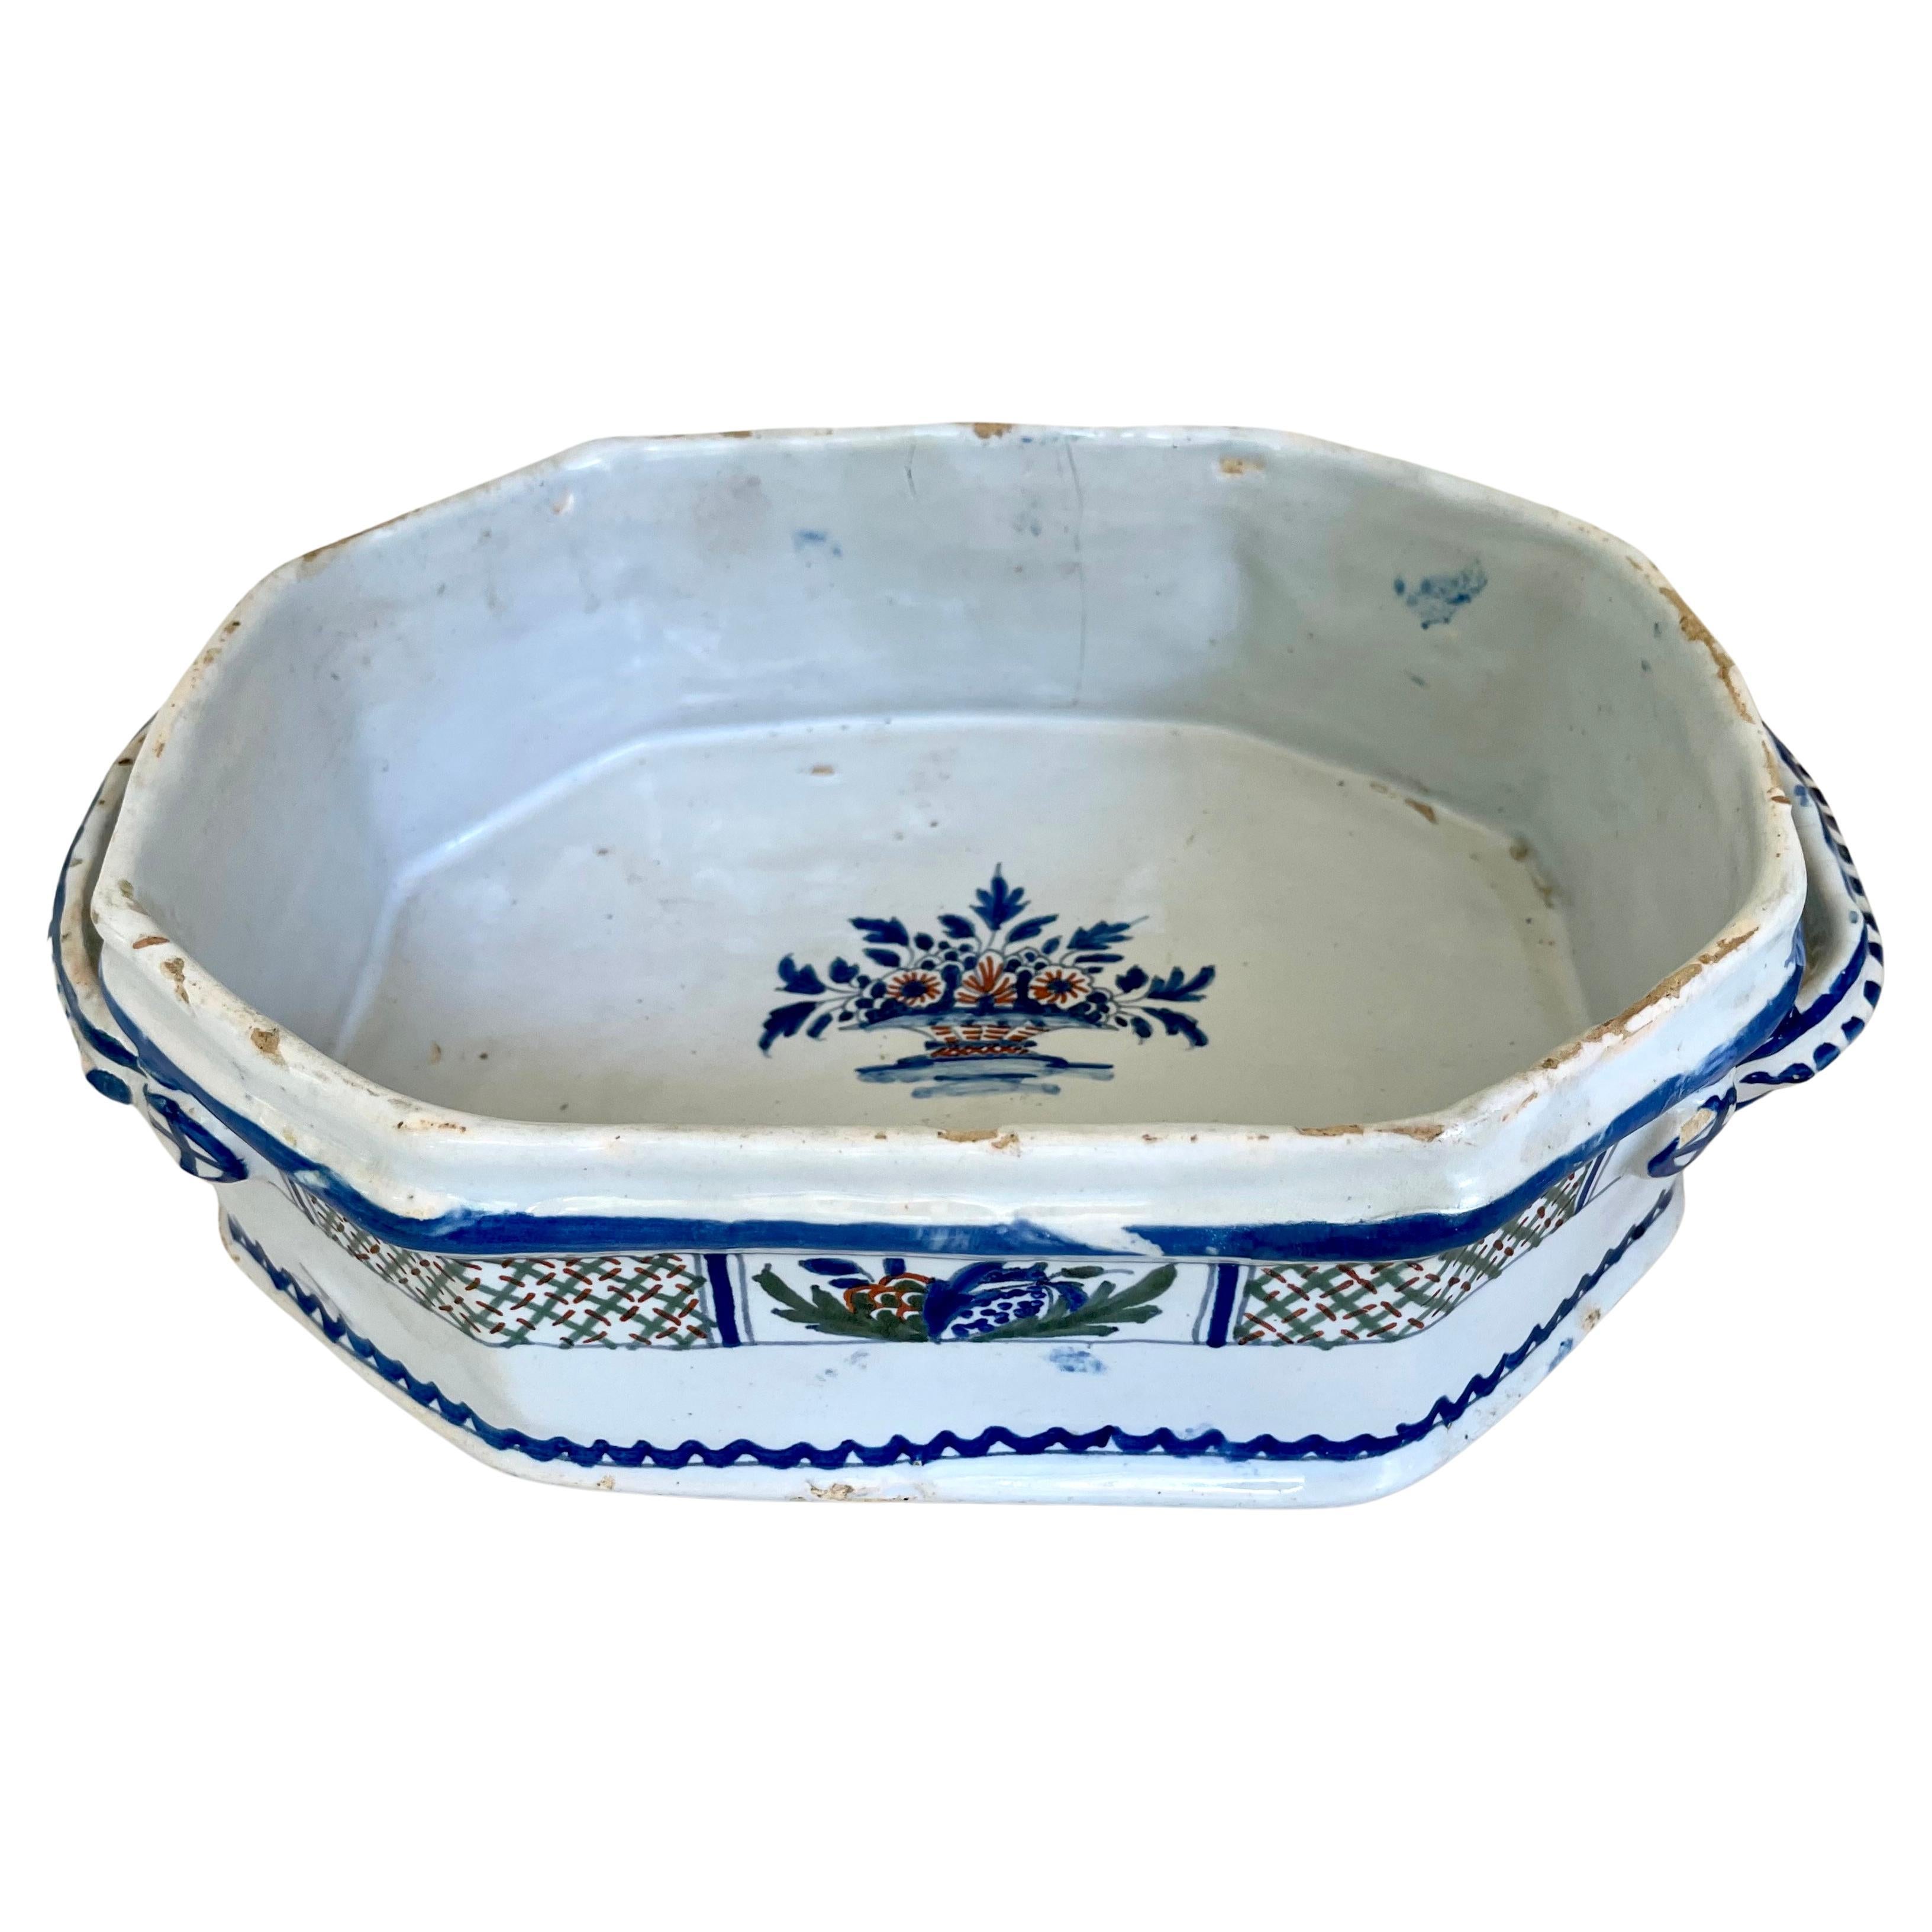 Blue and White Glazed French Terracotta Compote